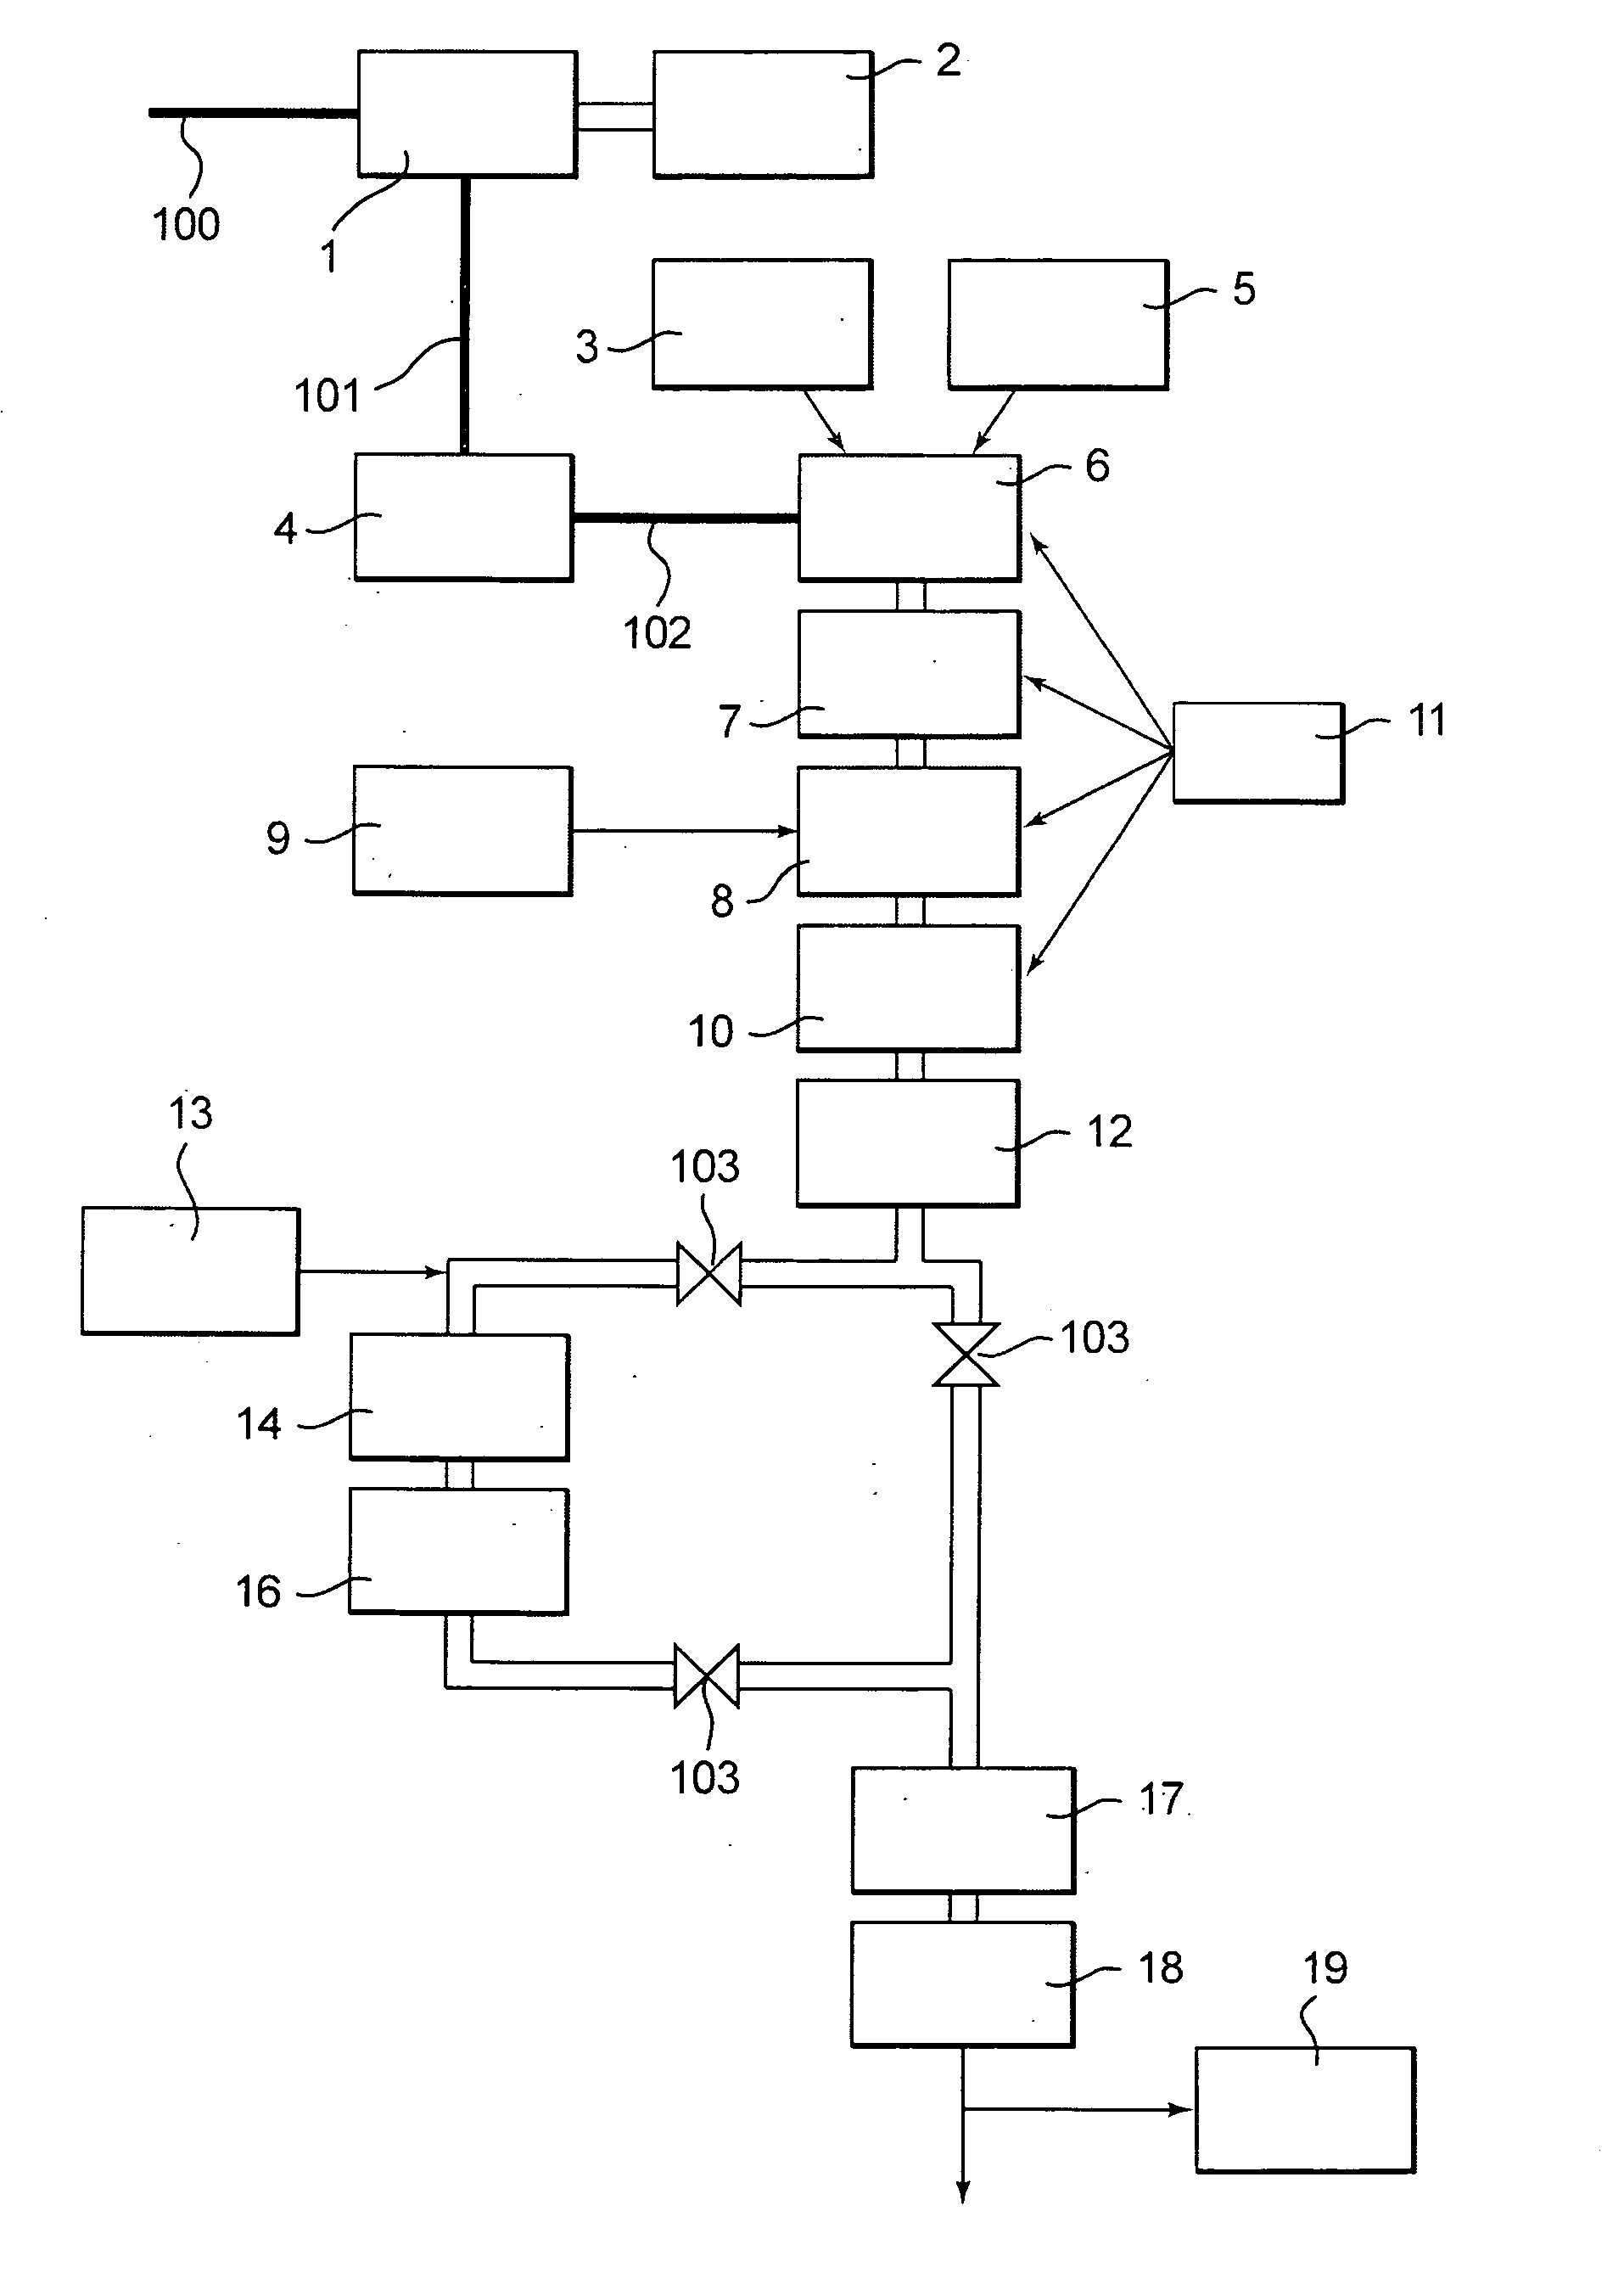 Device and Method for Destroying Liquid, Powder or Gaseous Waste Using an Inductively Coupled Plasma